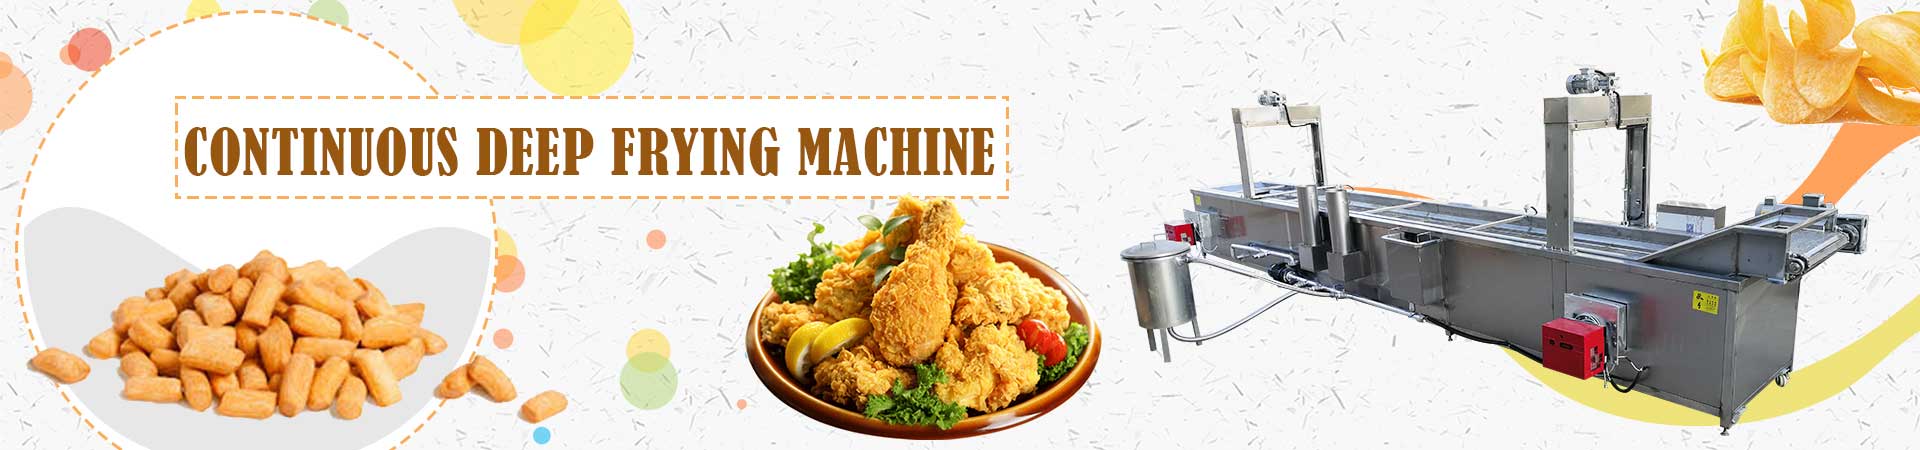 Continuous Deep Frying Machine 